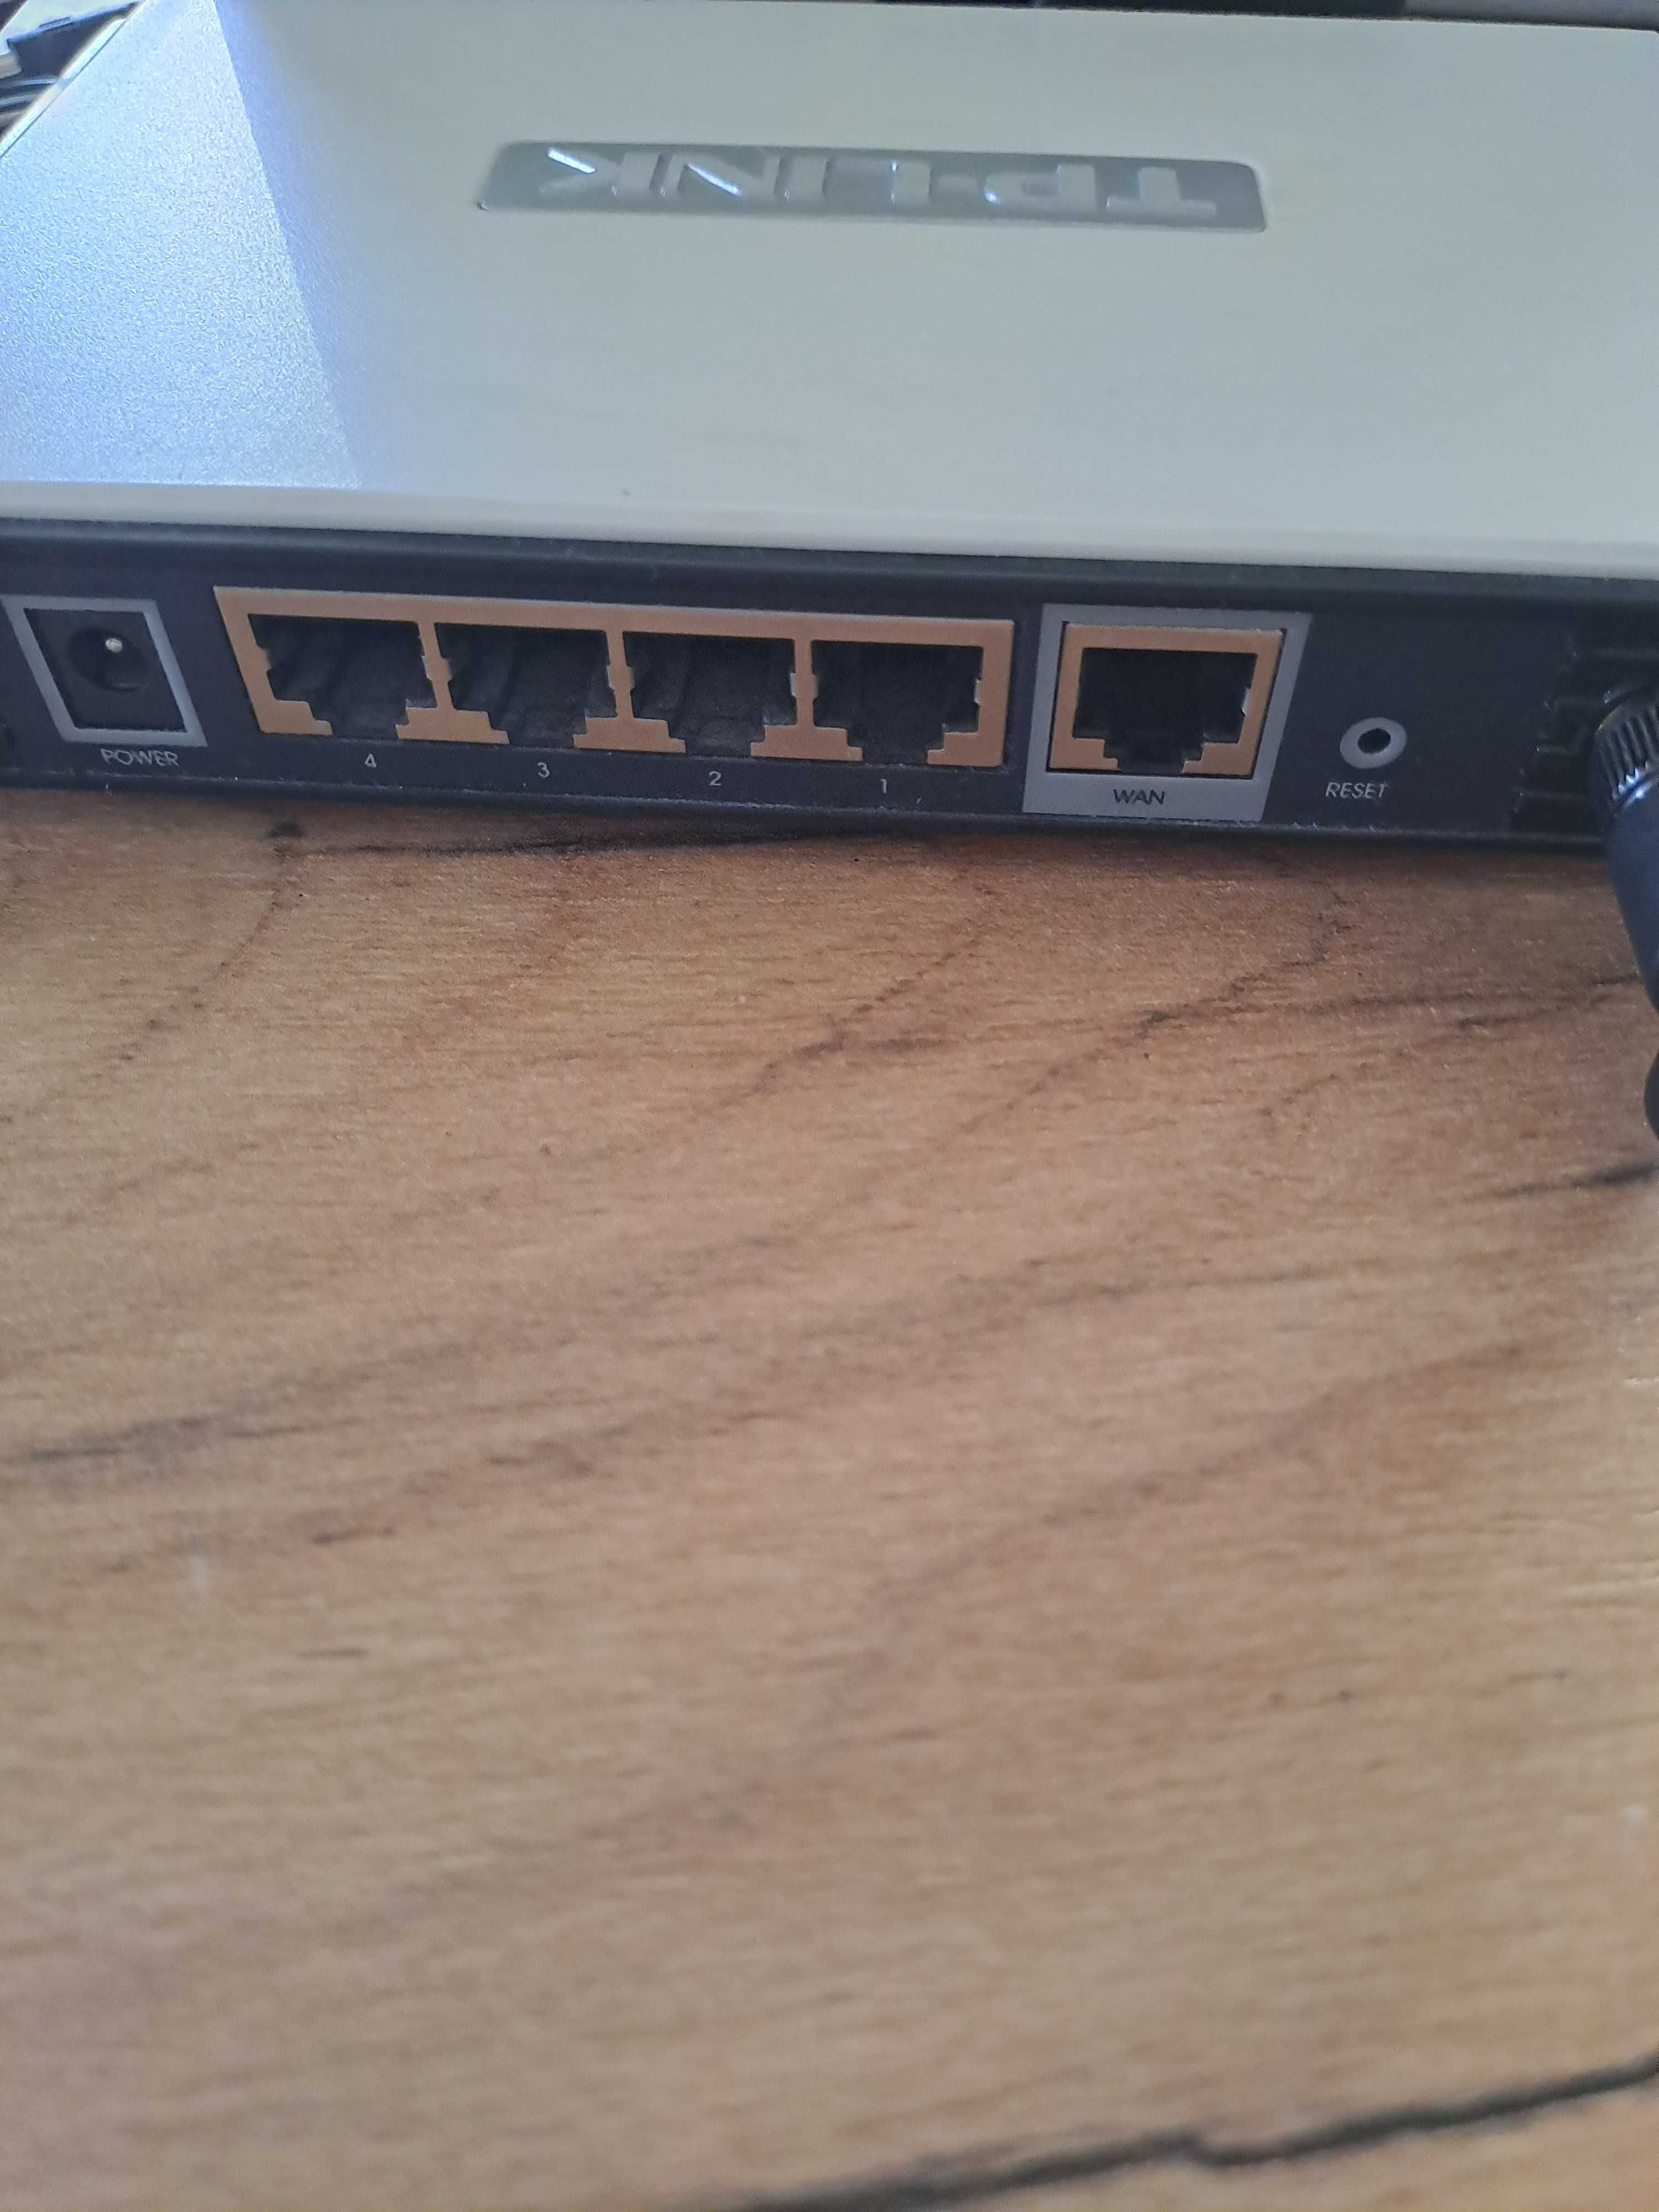 Router TP-LINK TL-WR7 4ON jak nowy